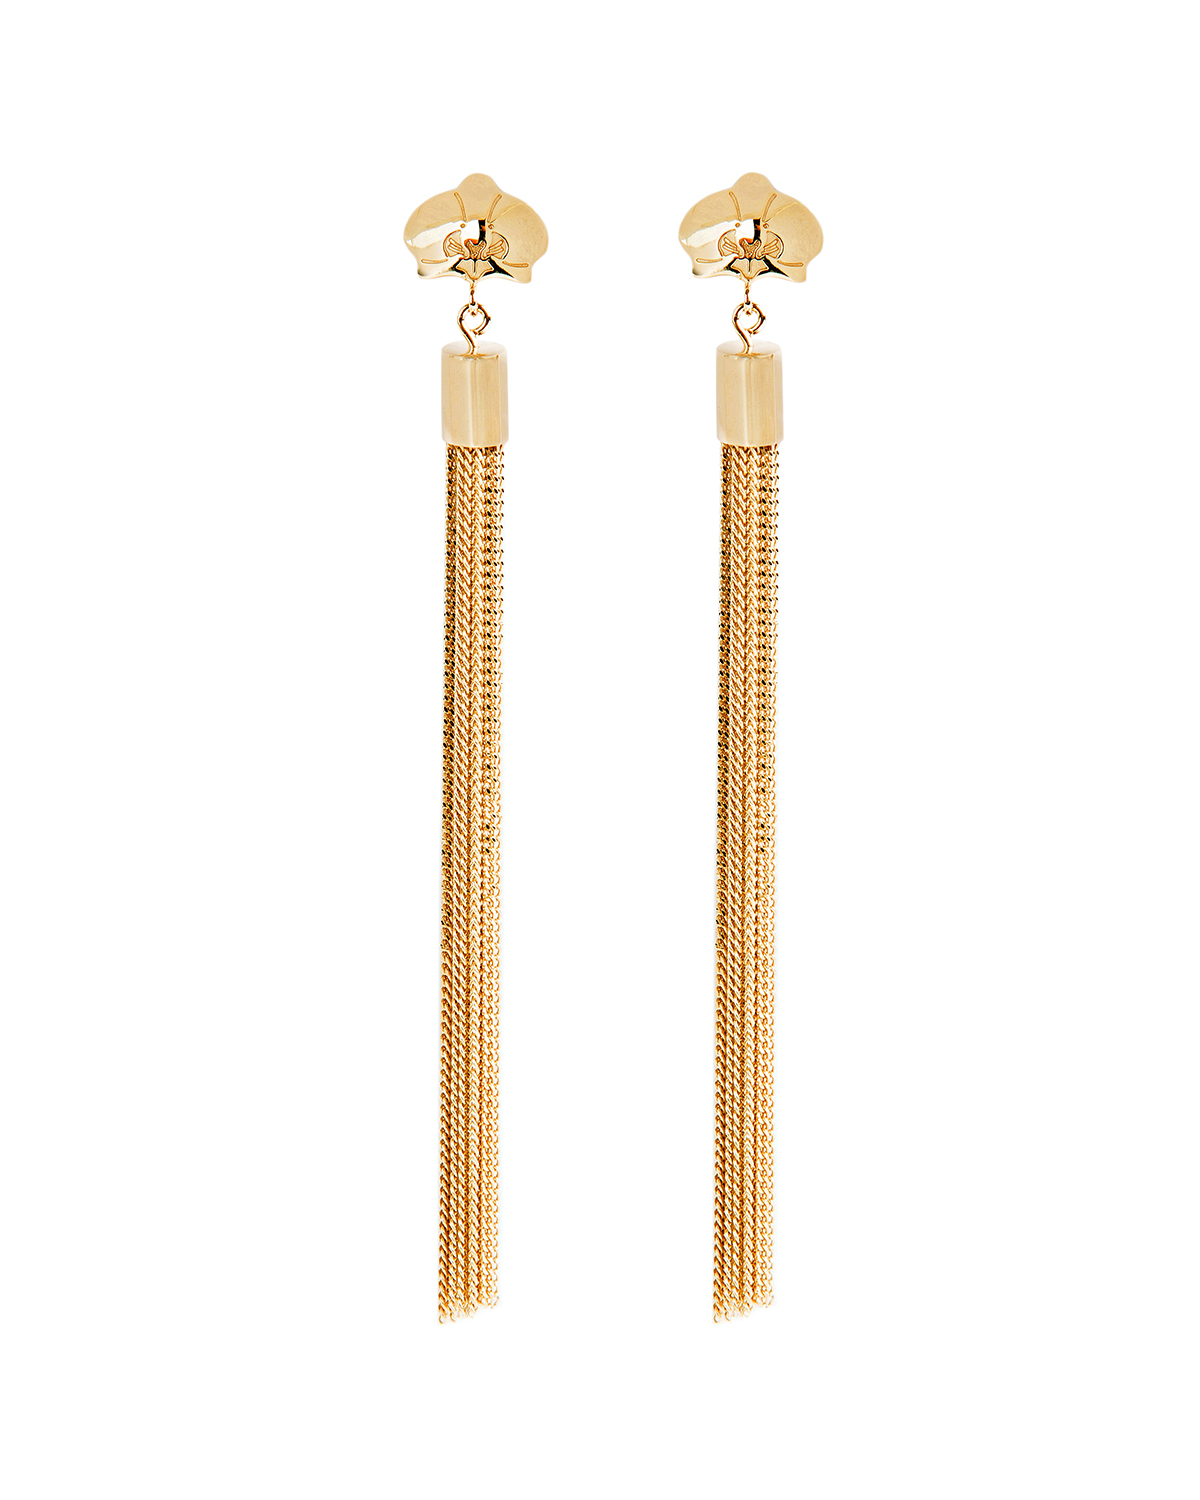 Pendant gold-plated earrings | Accessories, Jewelry, Gifts, Accessories, Cruise 2023 Collection, Valentine's Day, Mother's Day | Genny